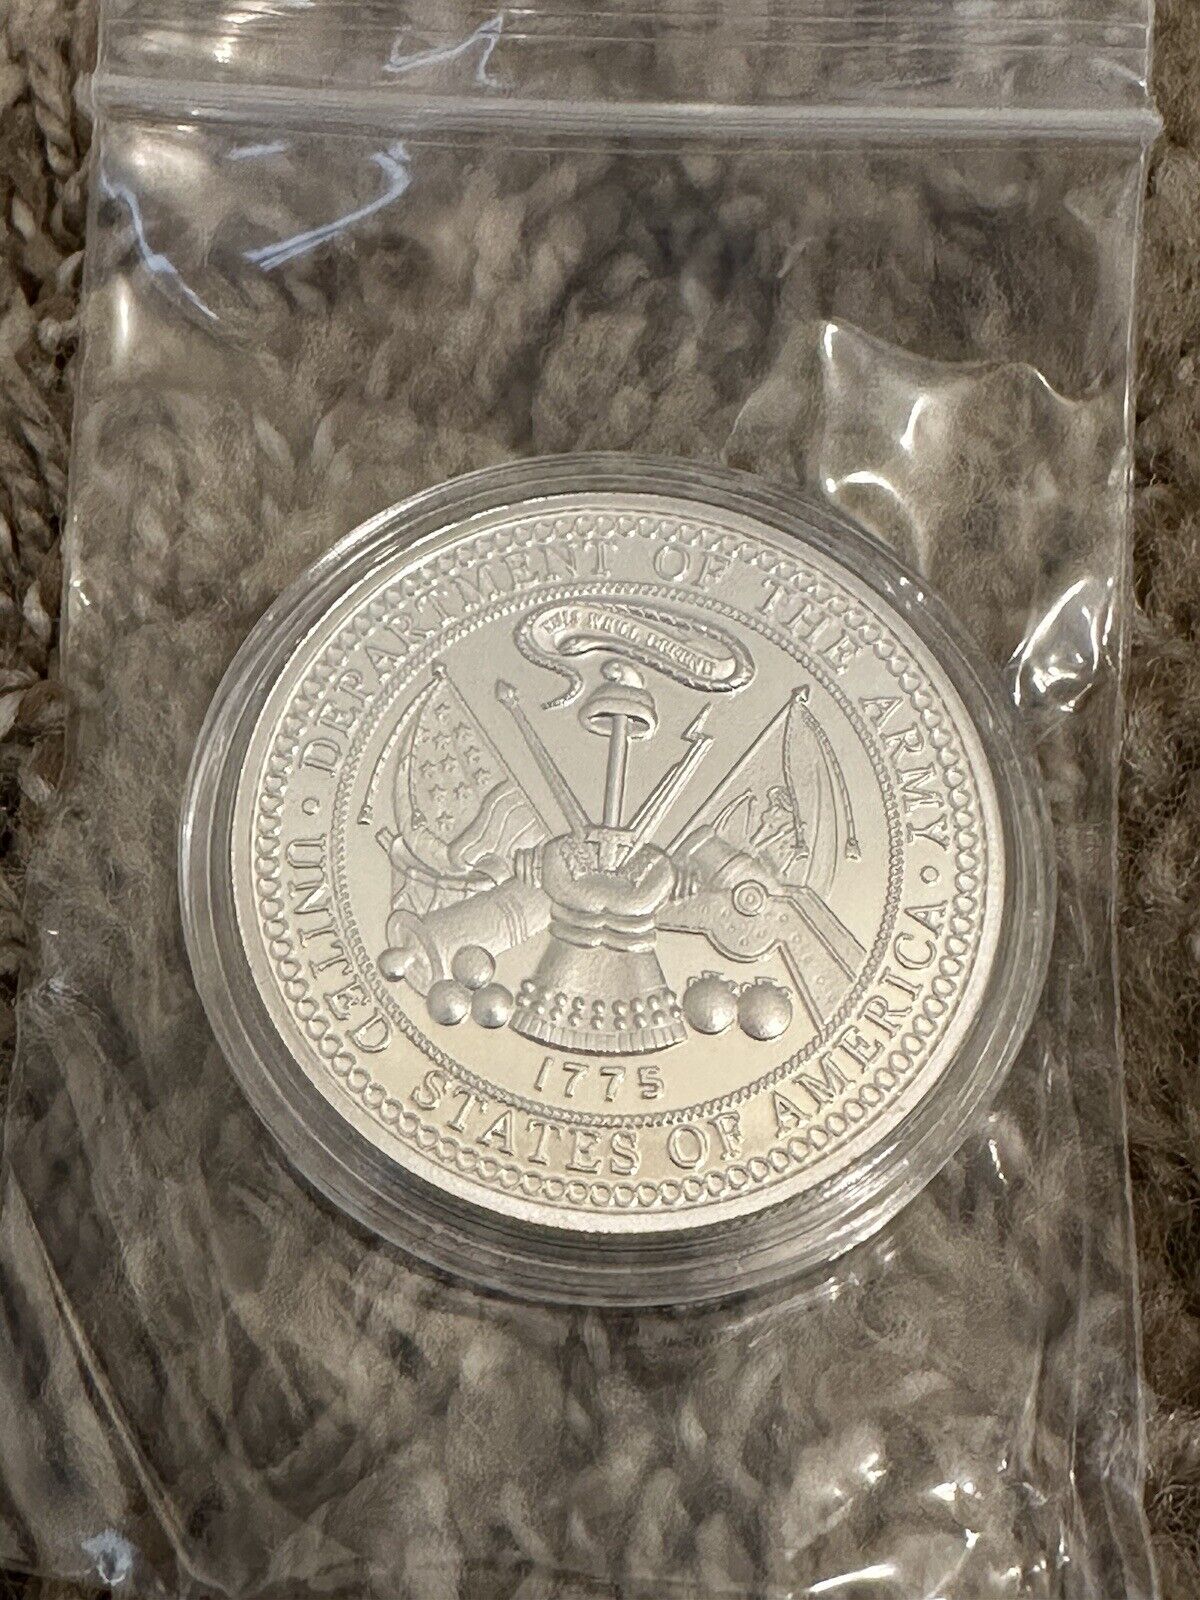 Army Special Forces De Oppresso Liber Airborne 1 oz Silver Challenge Coin